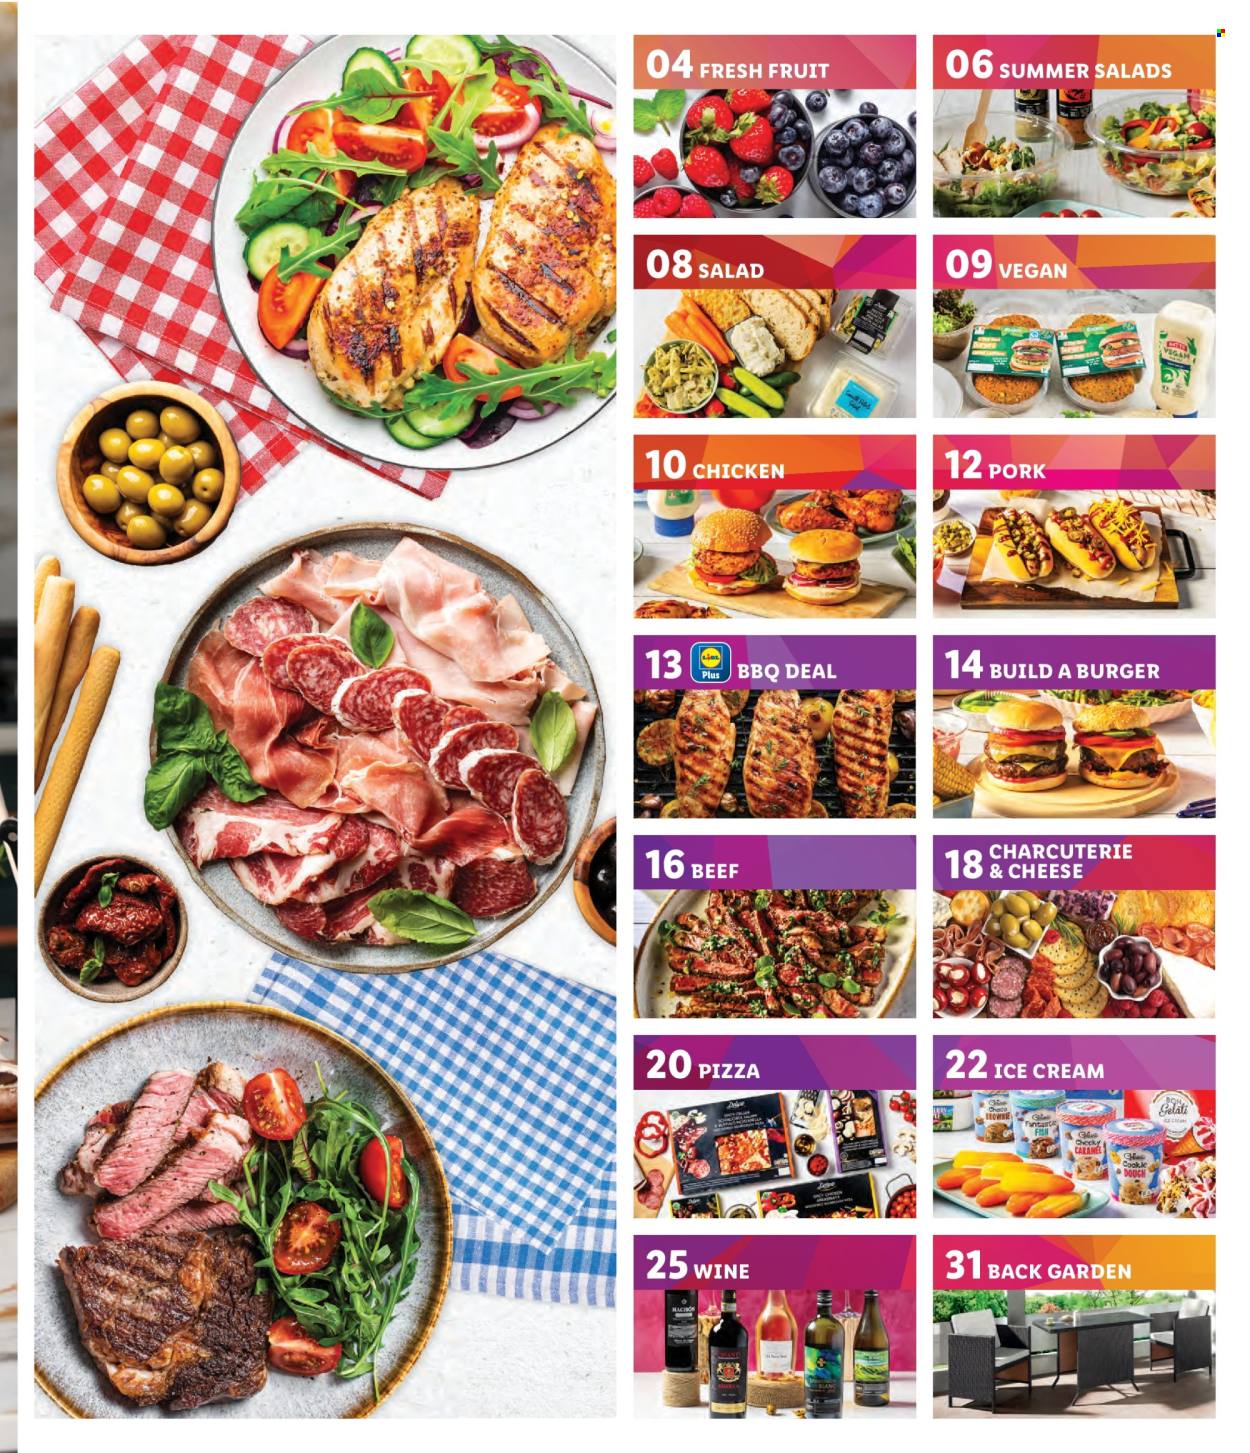 thumbnail - Lidl offer  - Sales products - alcohol, salad, pizza, charcuterie, ice cream, wine. Page 3.